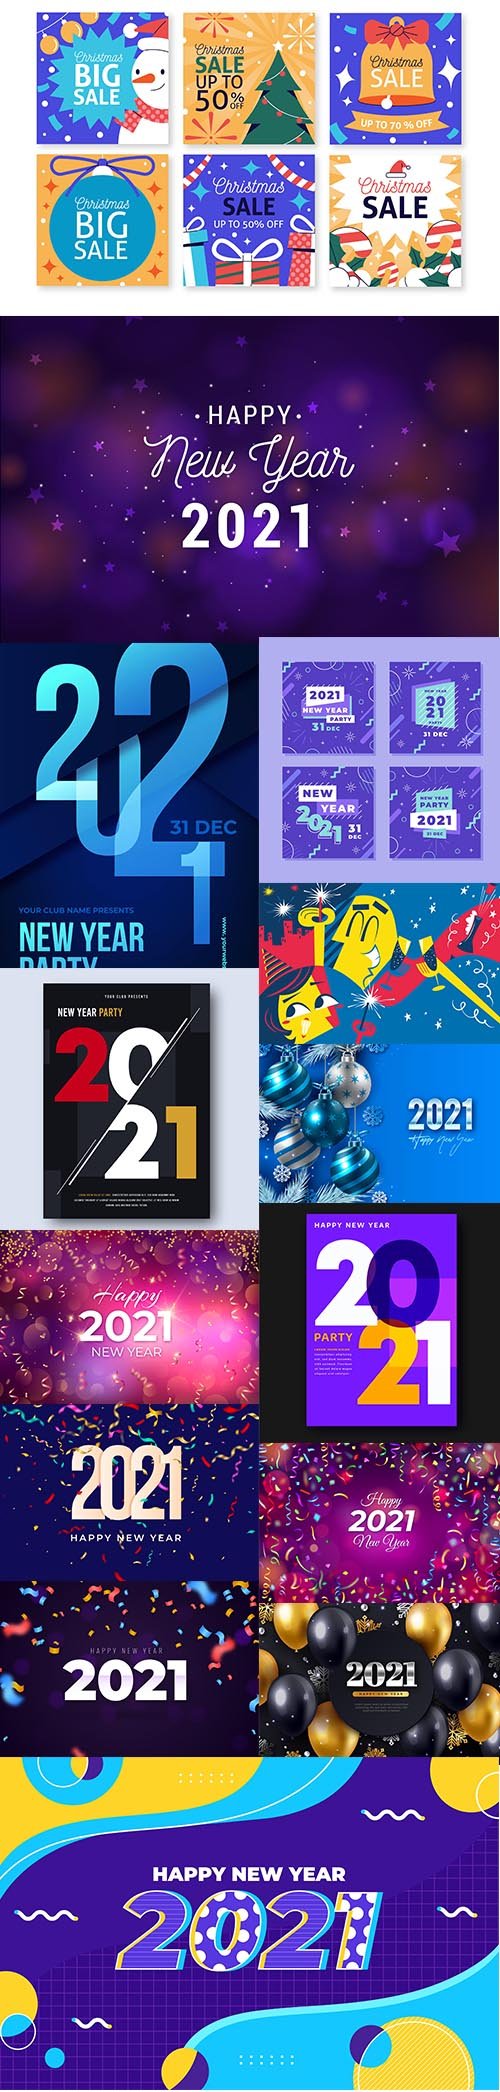 Realistic new year 2021 background